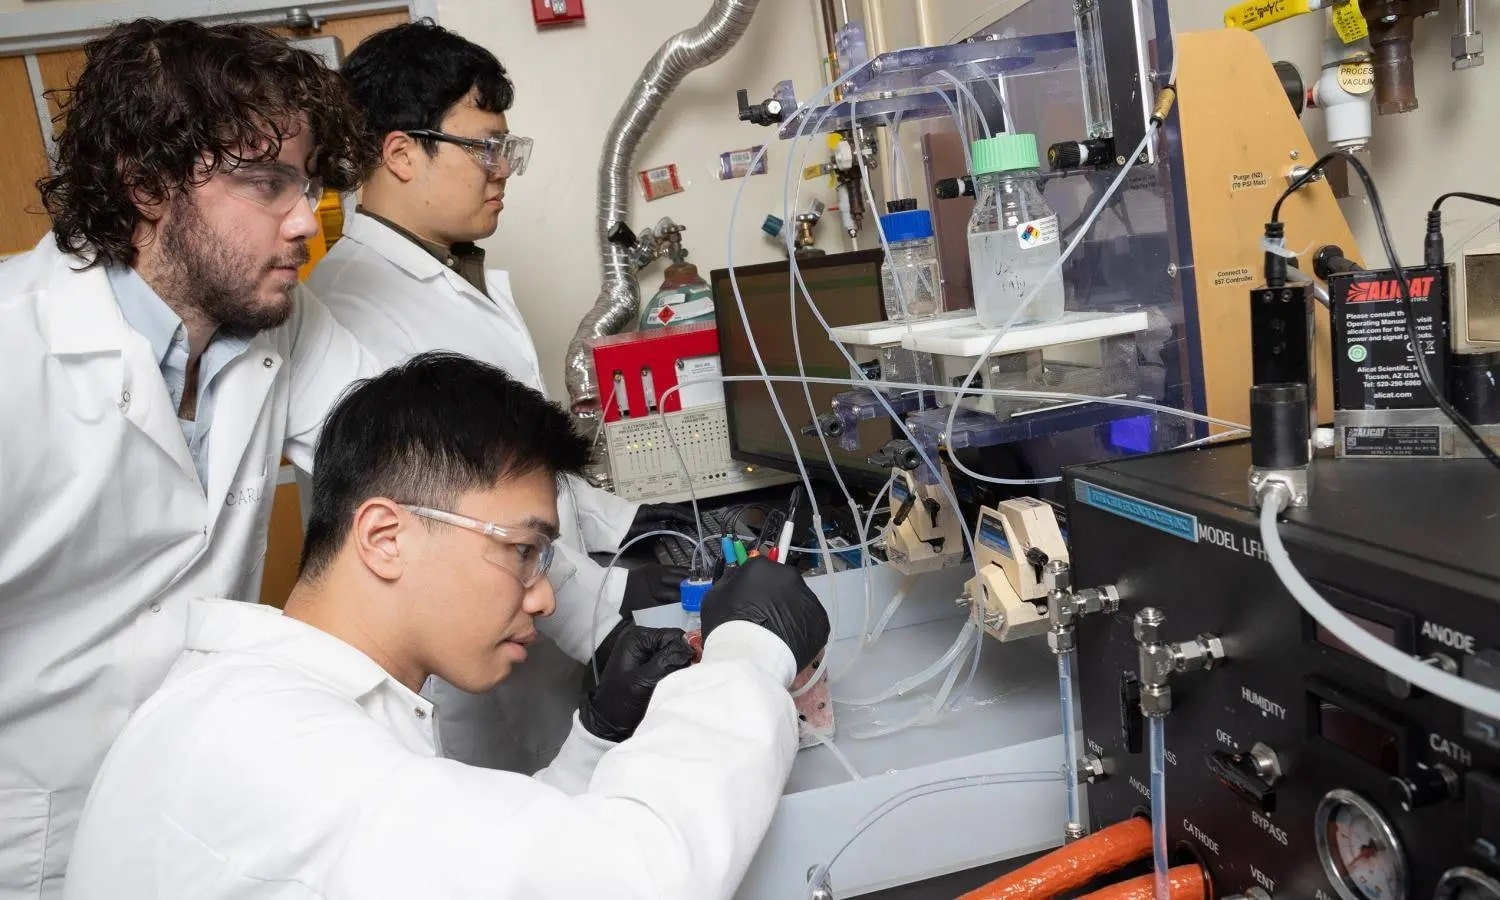 A new electrochemical reactor design developed with Marta Hatzell by postdoctoral scholar Hakhyeon Song (middle) and Ph.D. students Carlos Fernández and Po-Wei Huang (seated) converts carbon dioxide removed from the air into useful raw material.